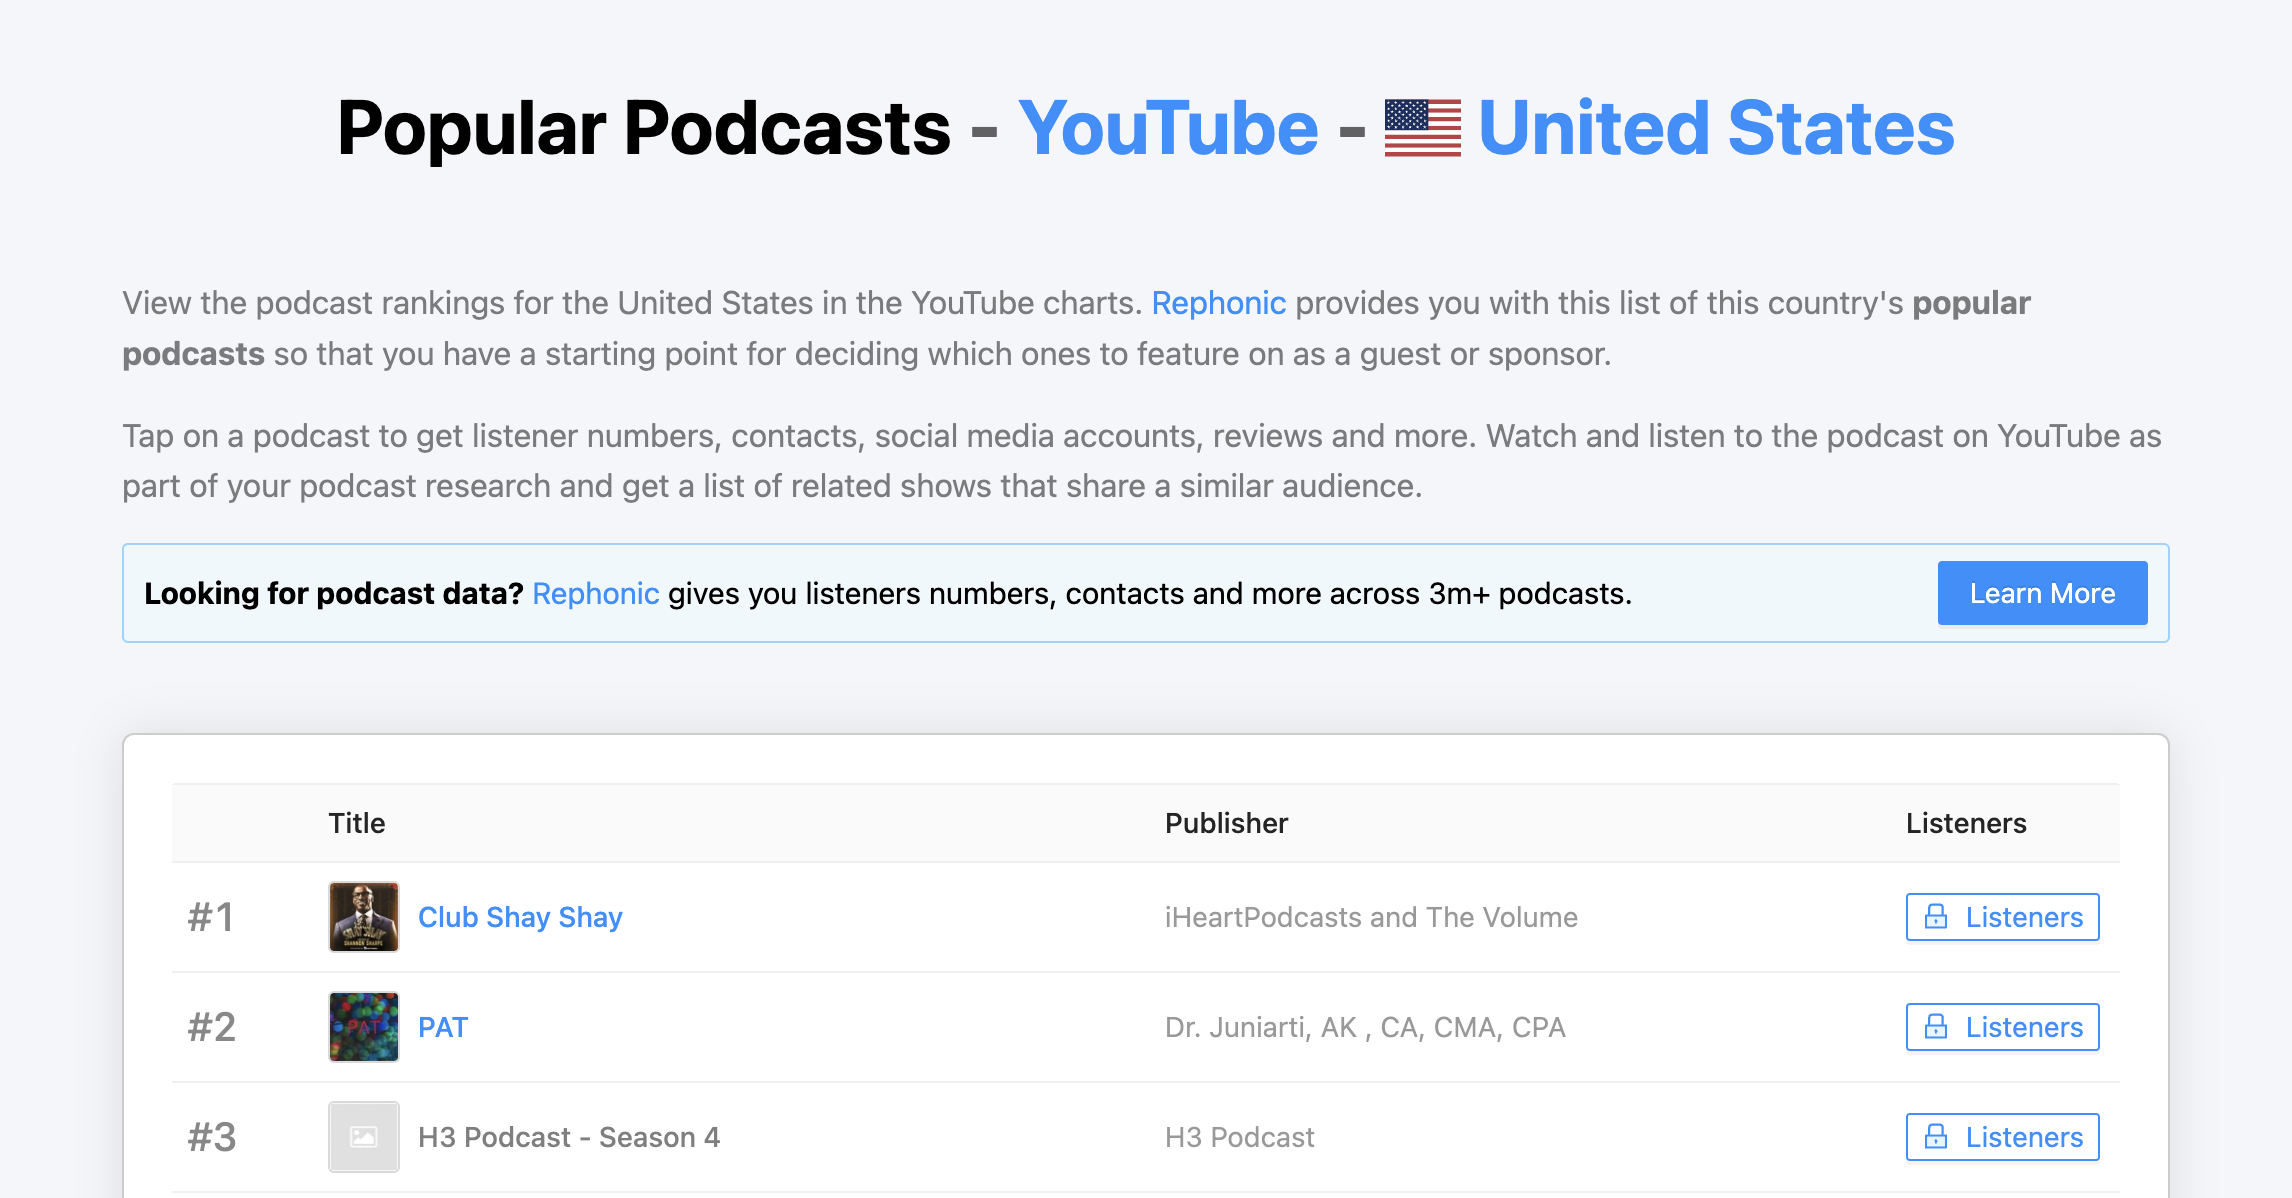 YouTube podcast charts for the United States